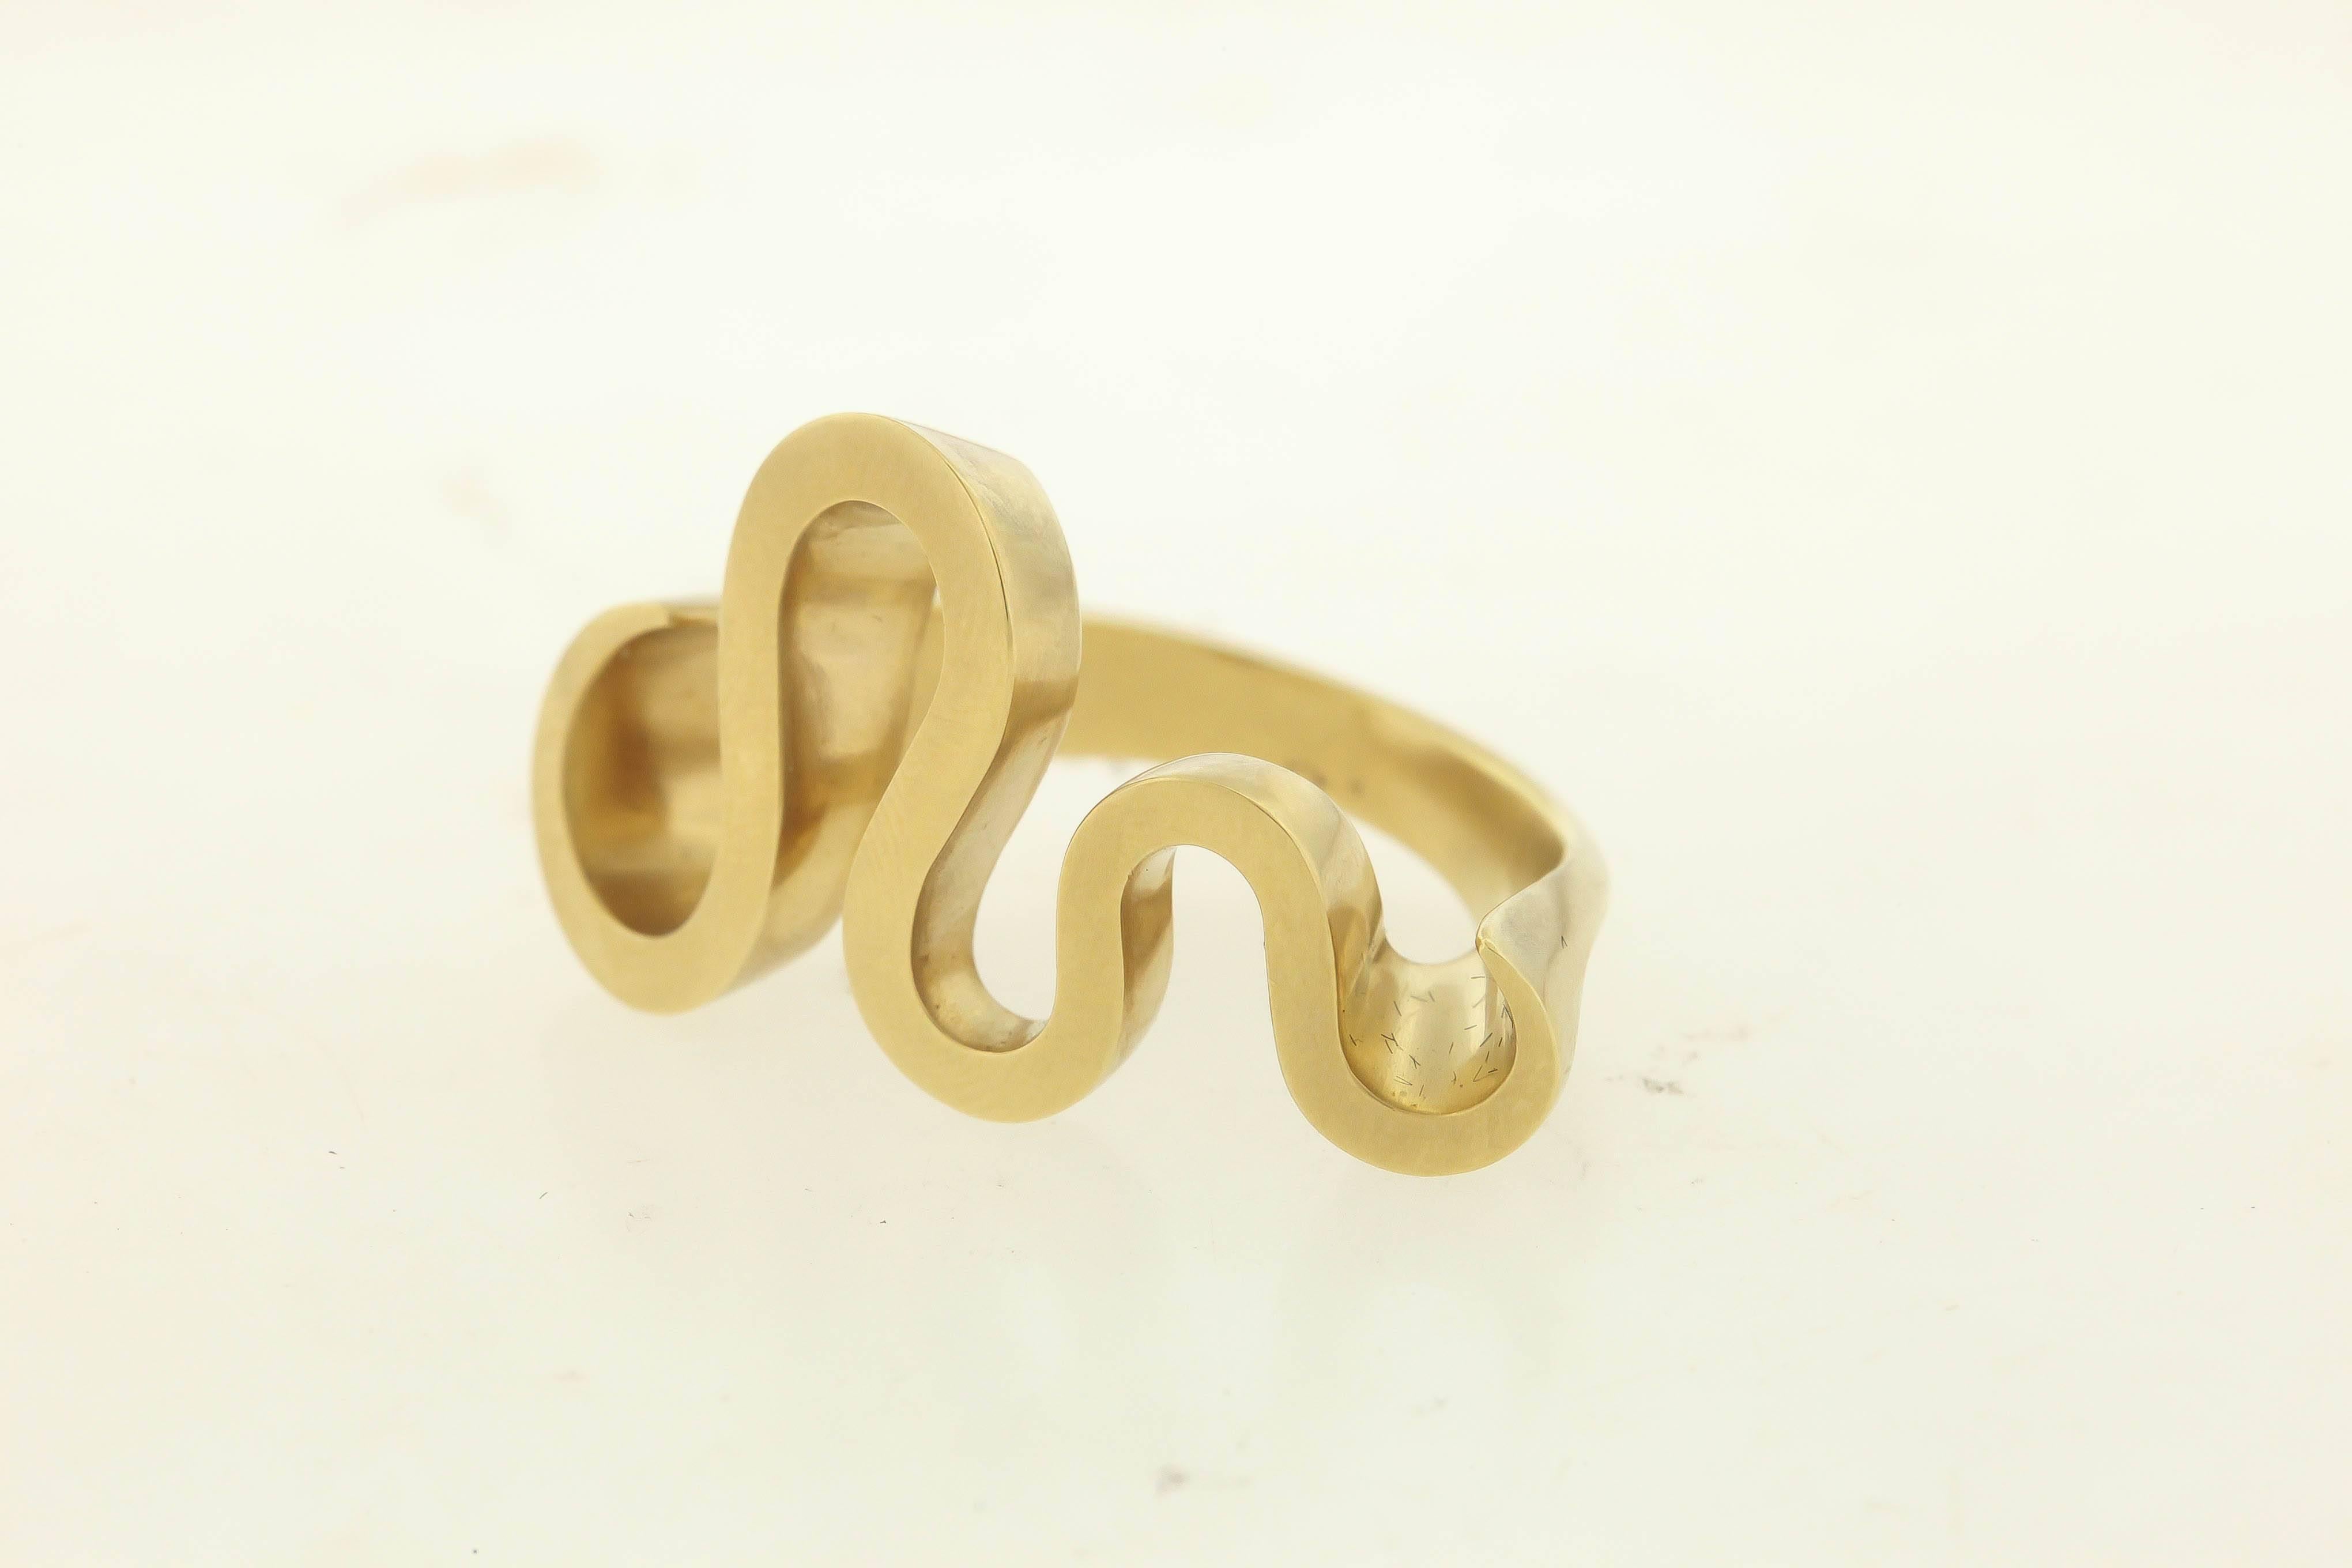 Angela Hubel's abstract Serpenti ring curves over the finger in a voluminous 18K gold sculptural form.  The ring measures 1-1/4